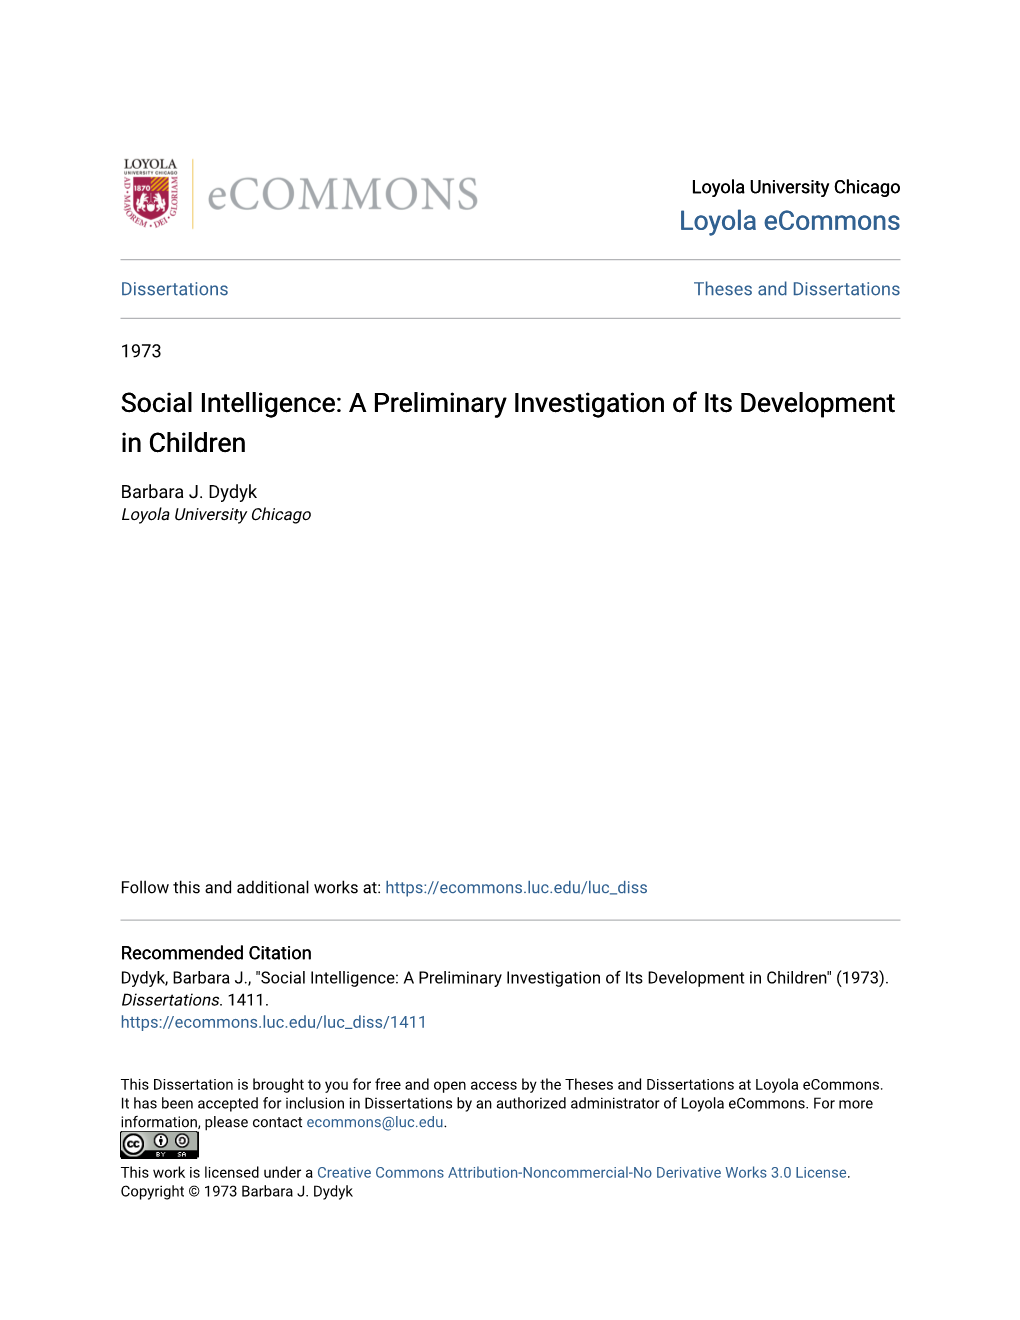 Social Intelligence: a Preliminary Investigation of Its Development in Children